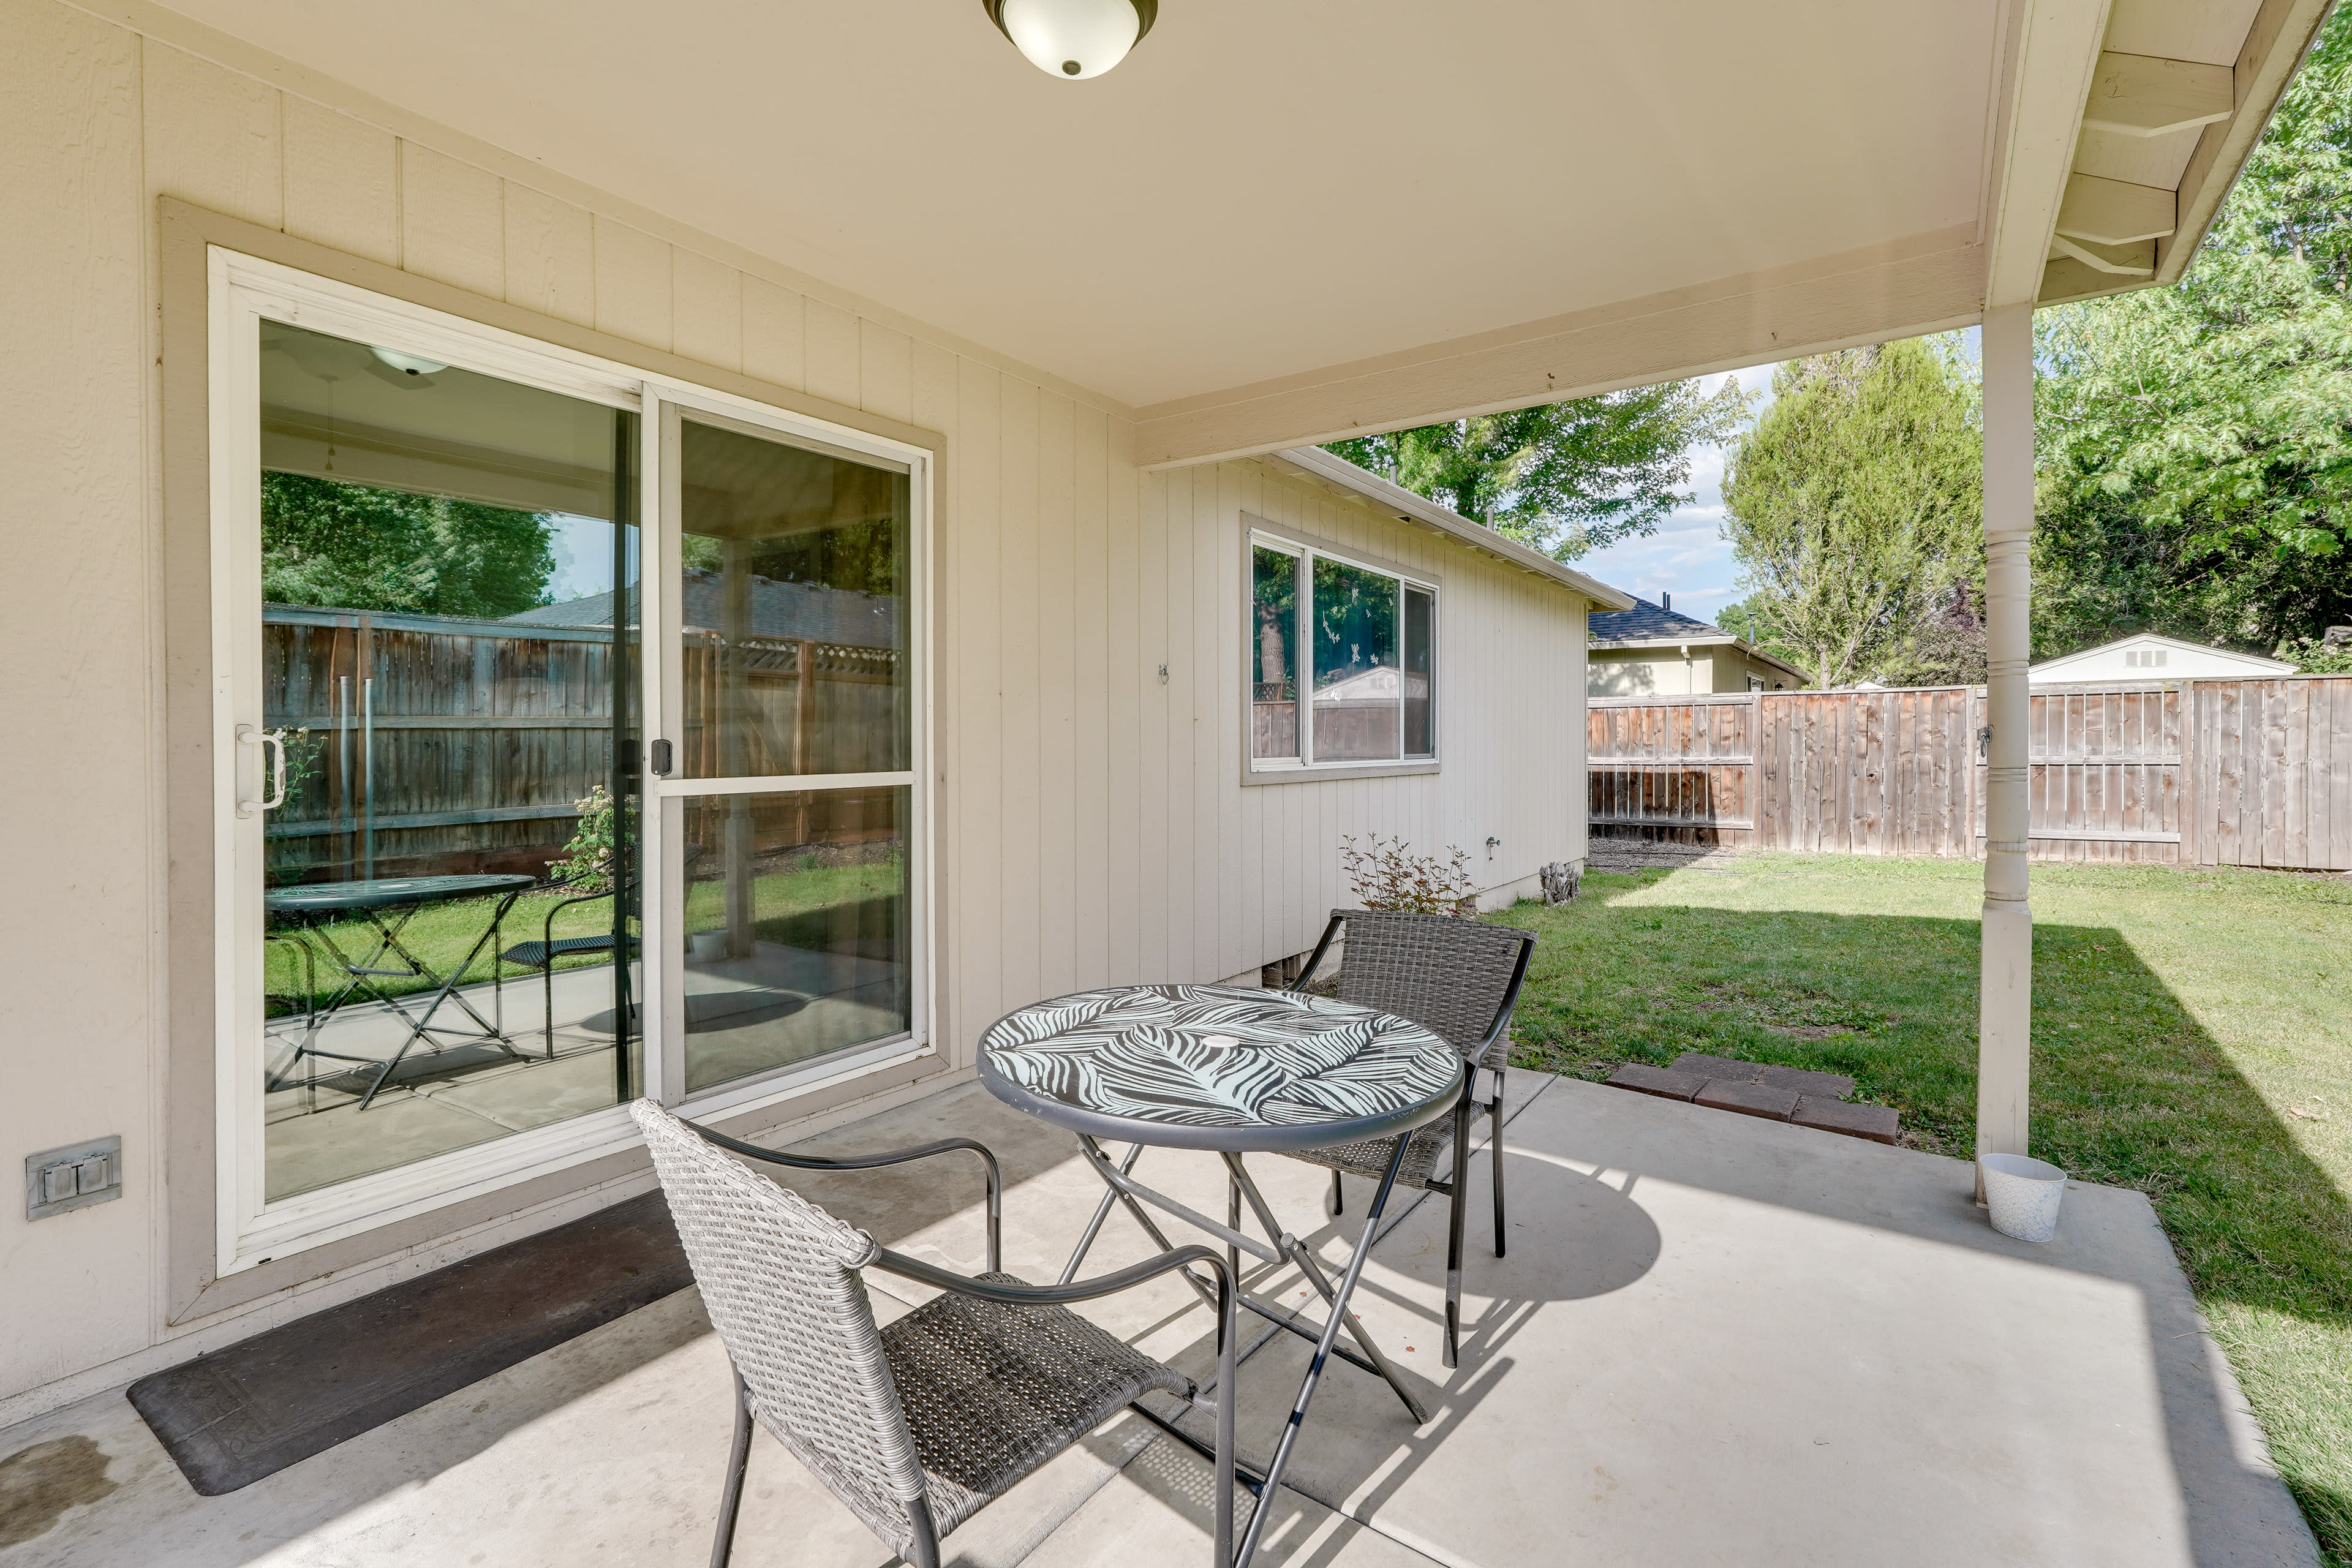 Covered Patio | Fenced Yard